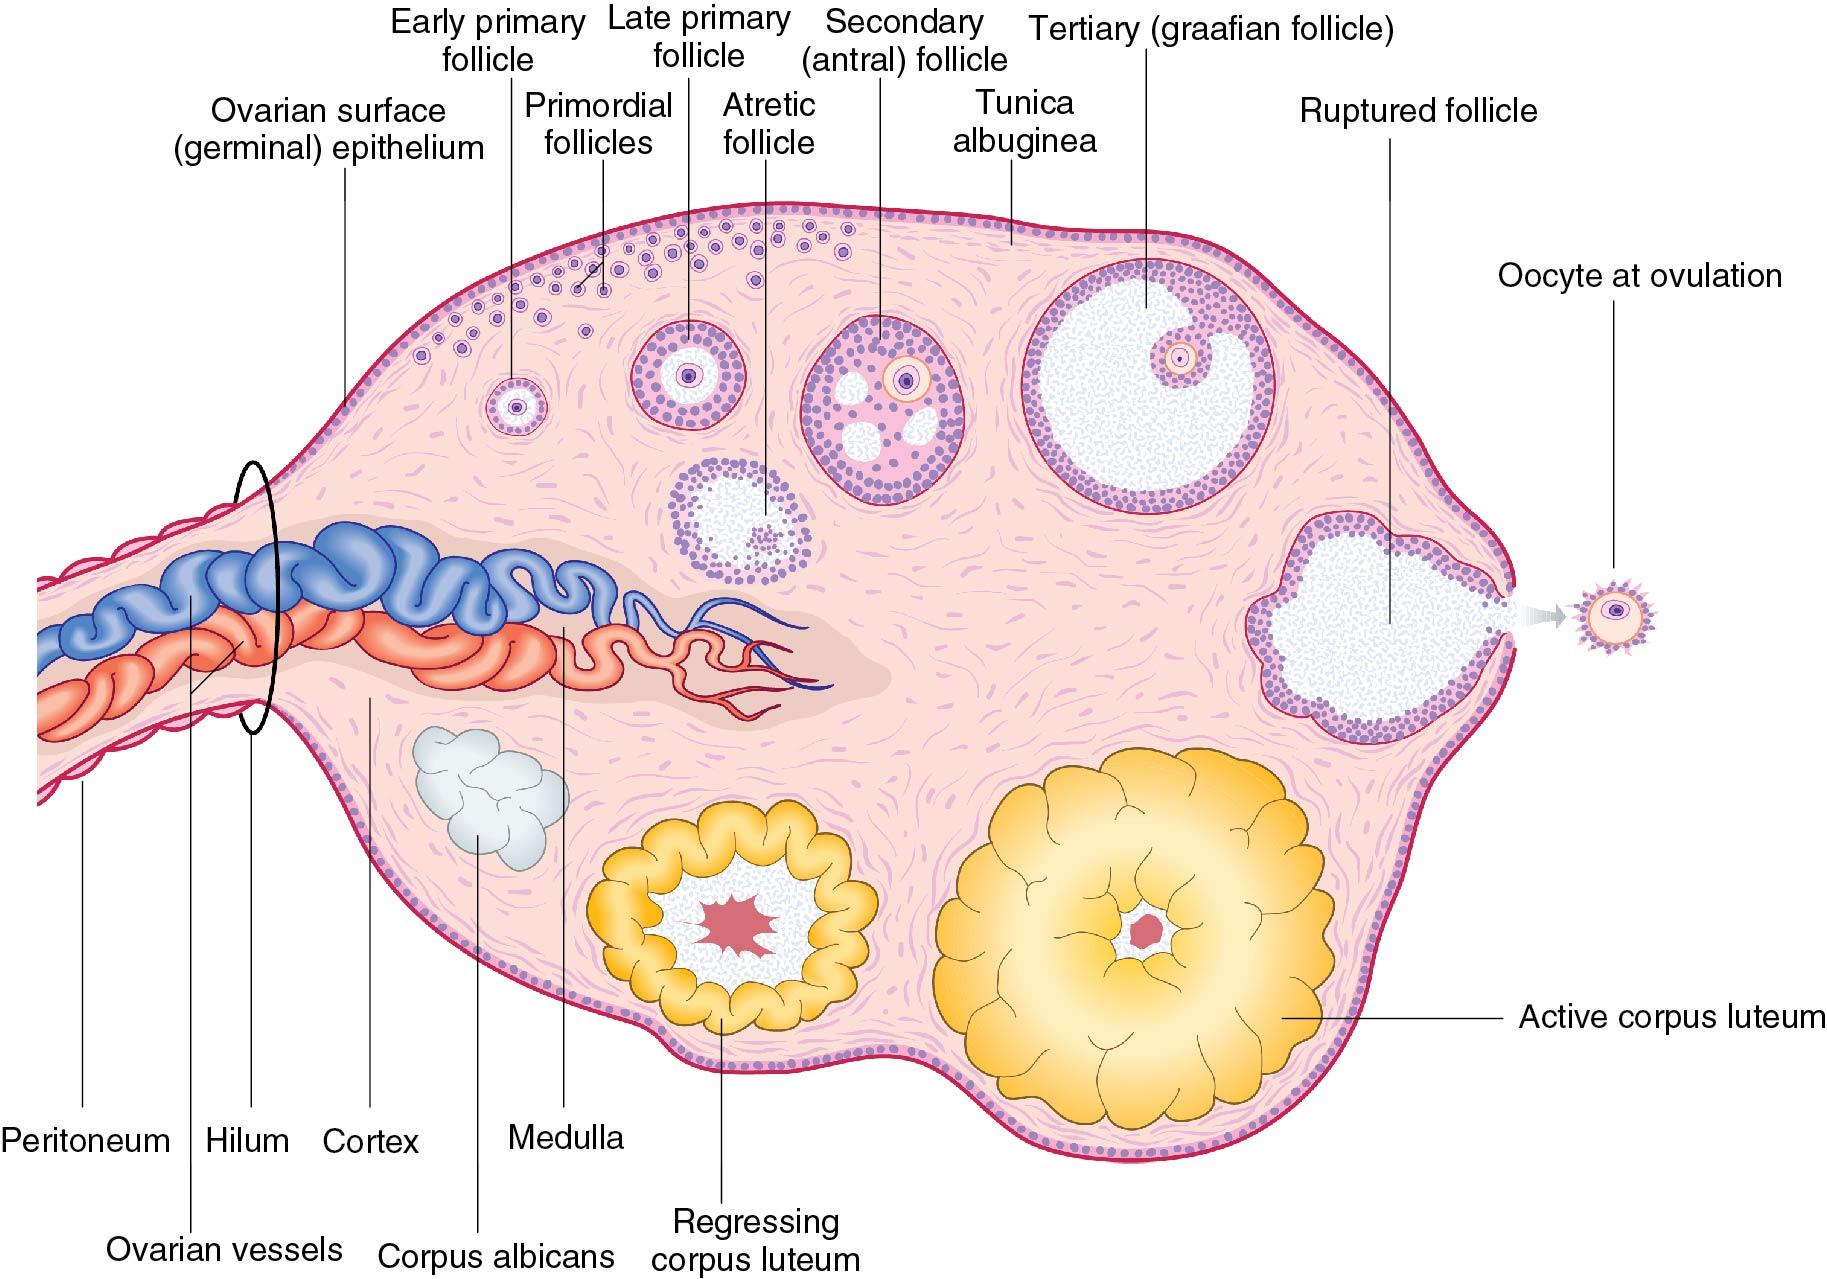 Fig. 3.22, A schematic drawing of the ovary. Note the single layer of cuboidal epithelium called the germinal epithelium. Note the graafian follicles in different stages of development.